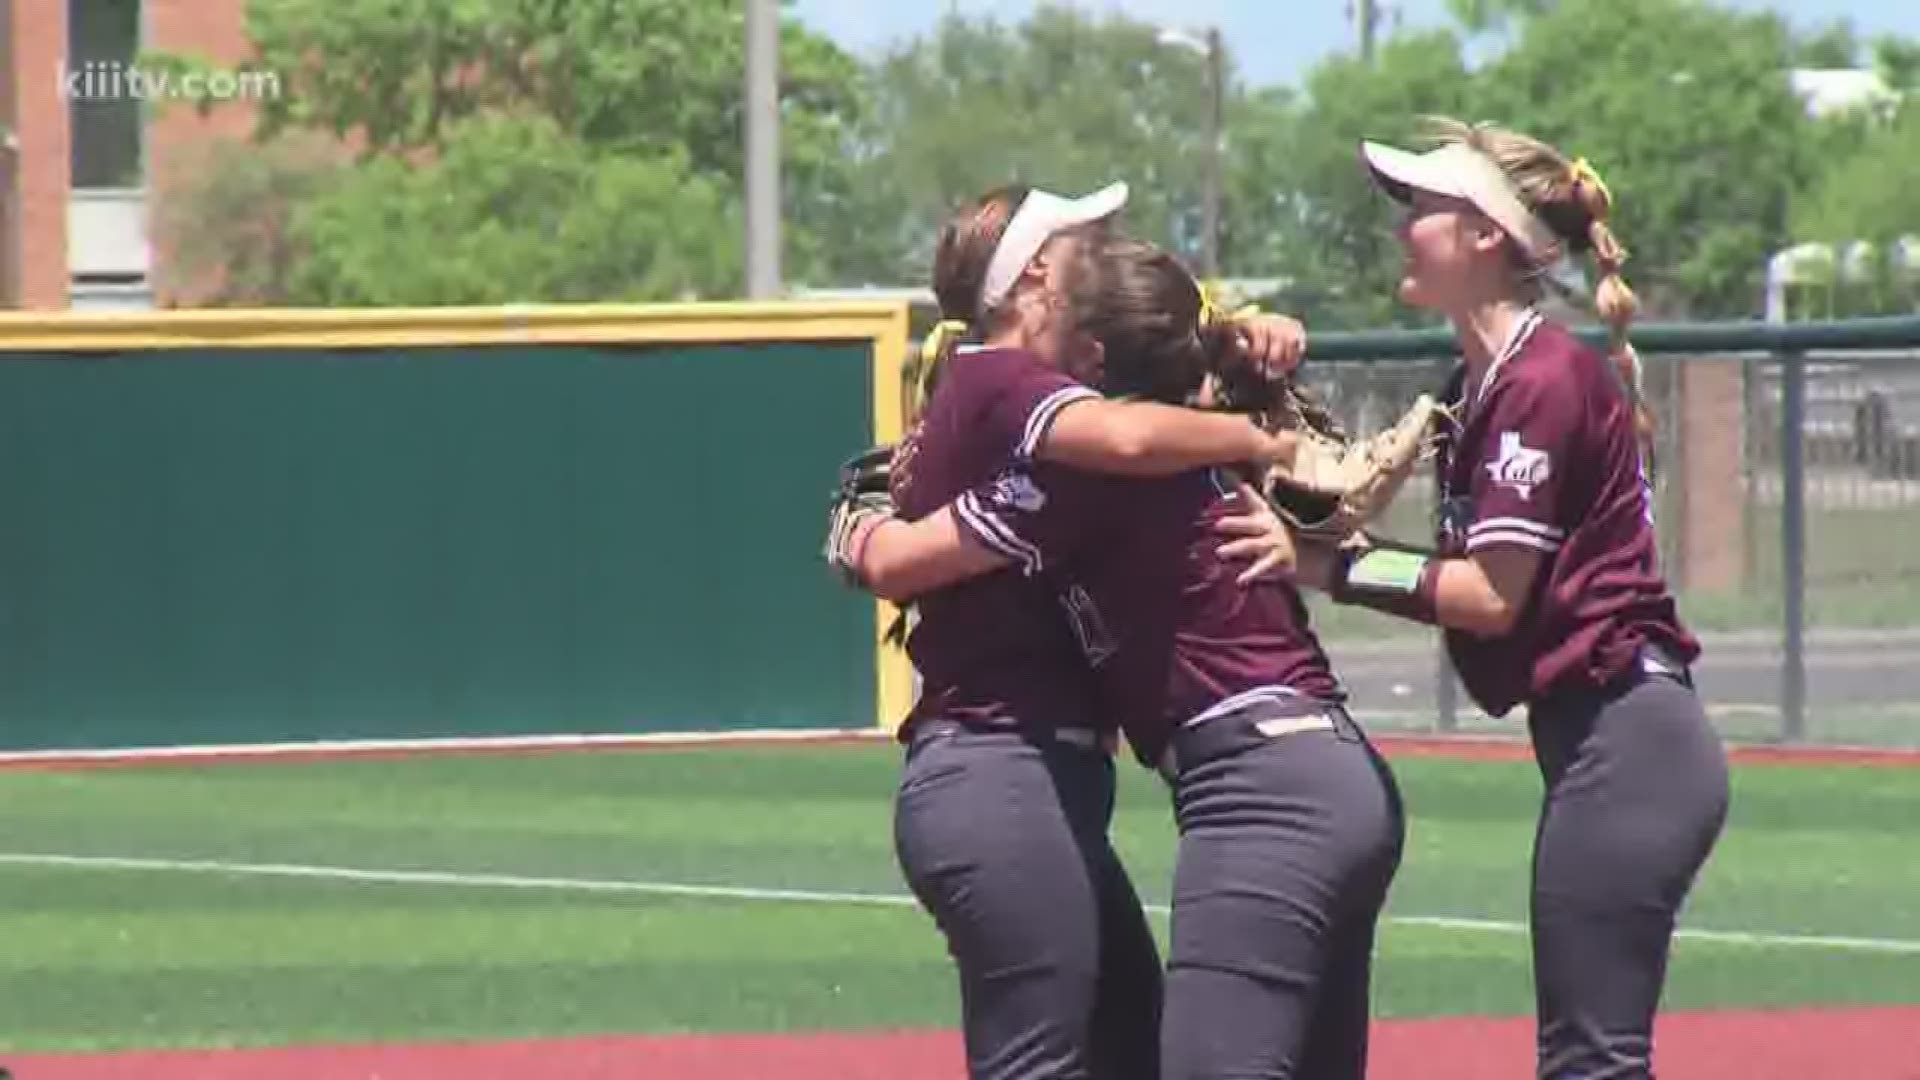 In what was our 3News Game of the Week series, Calallen punched it's ticket to the Area Round of the playoffs with a 15-3 win over Veterans Memorial in the decisive game three.